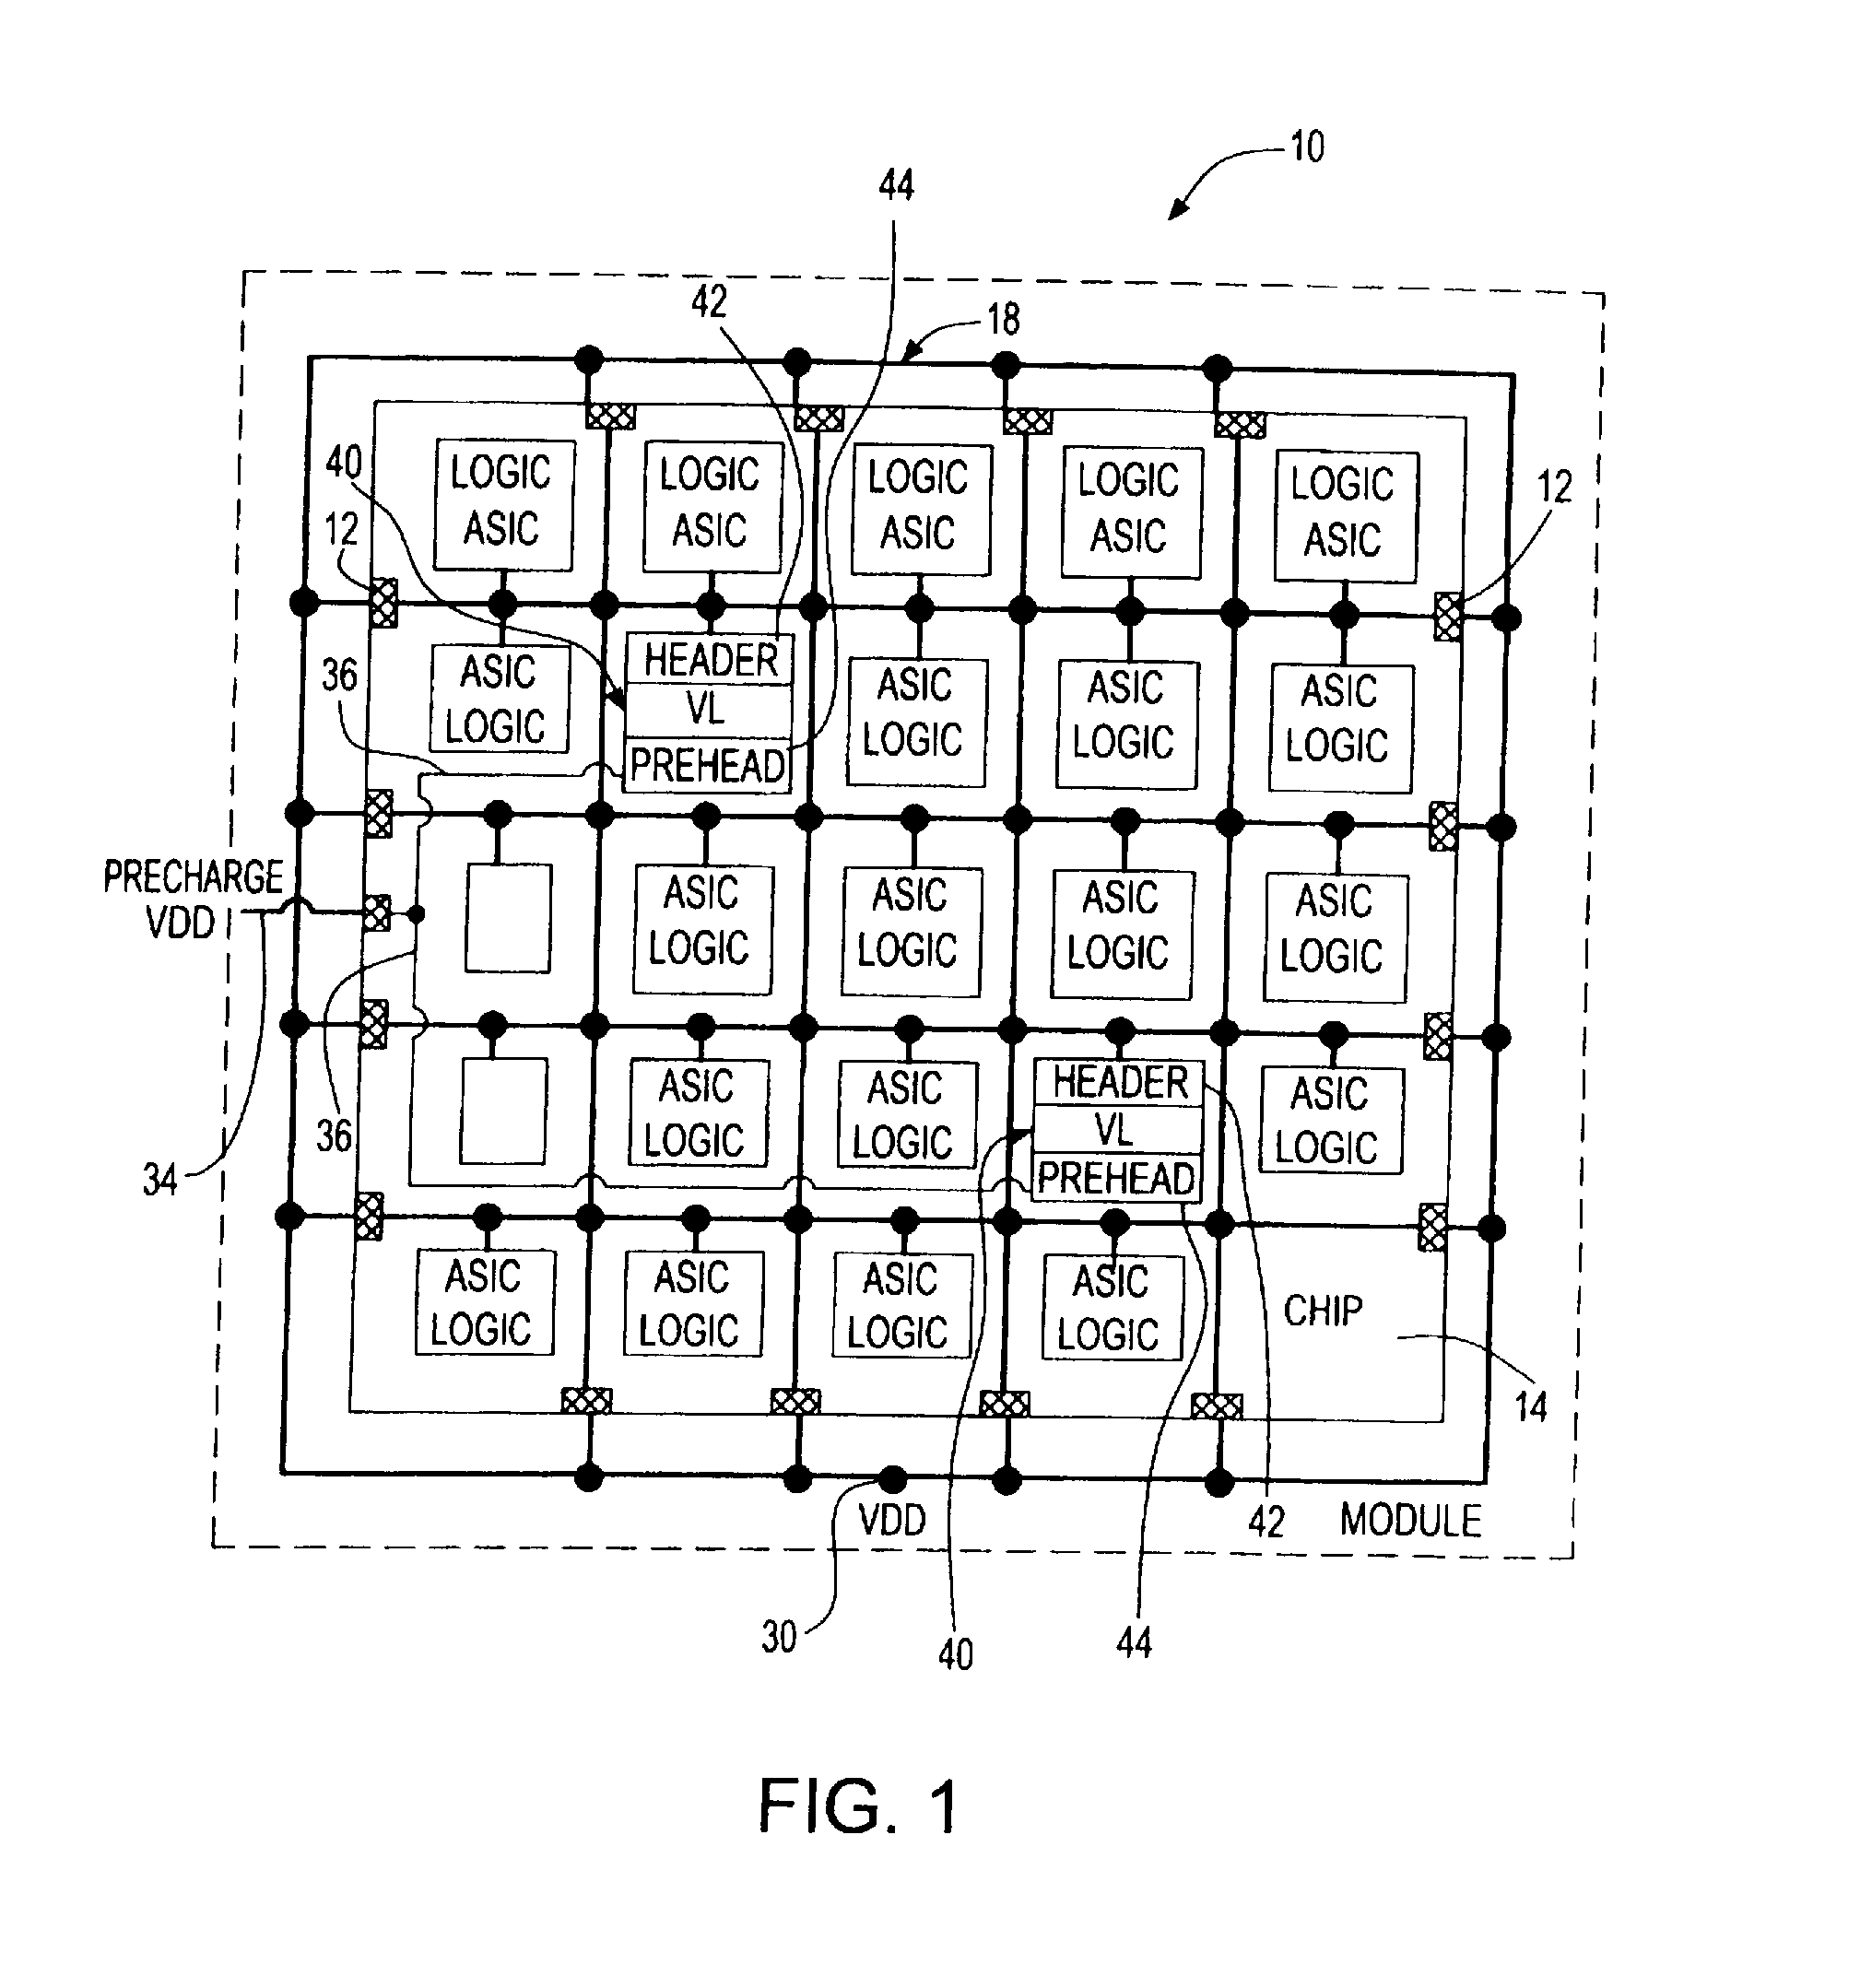 Design structure to eliminate step response power supply perturbation